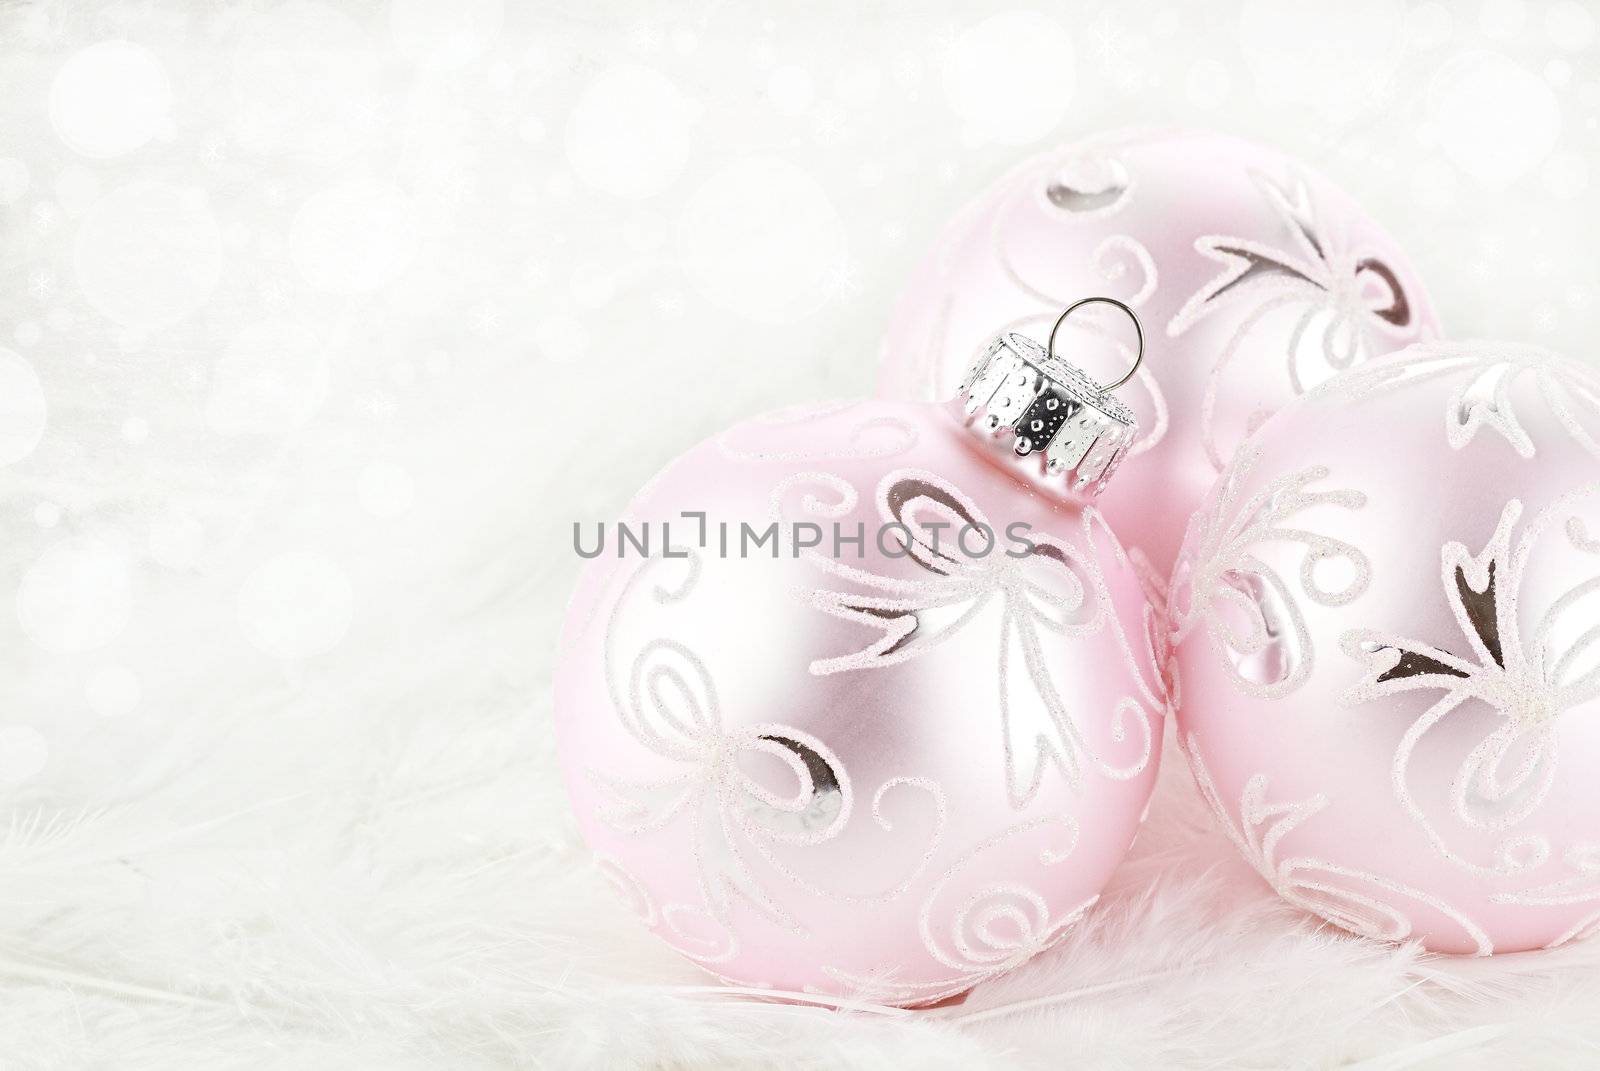 Macro of pink Christmas ornamets lying on a background of white feathers. Extreme shallow depth of field.